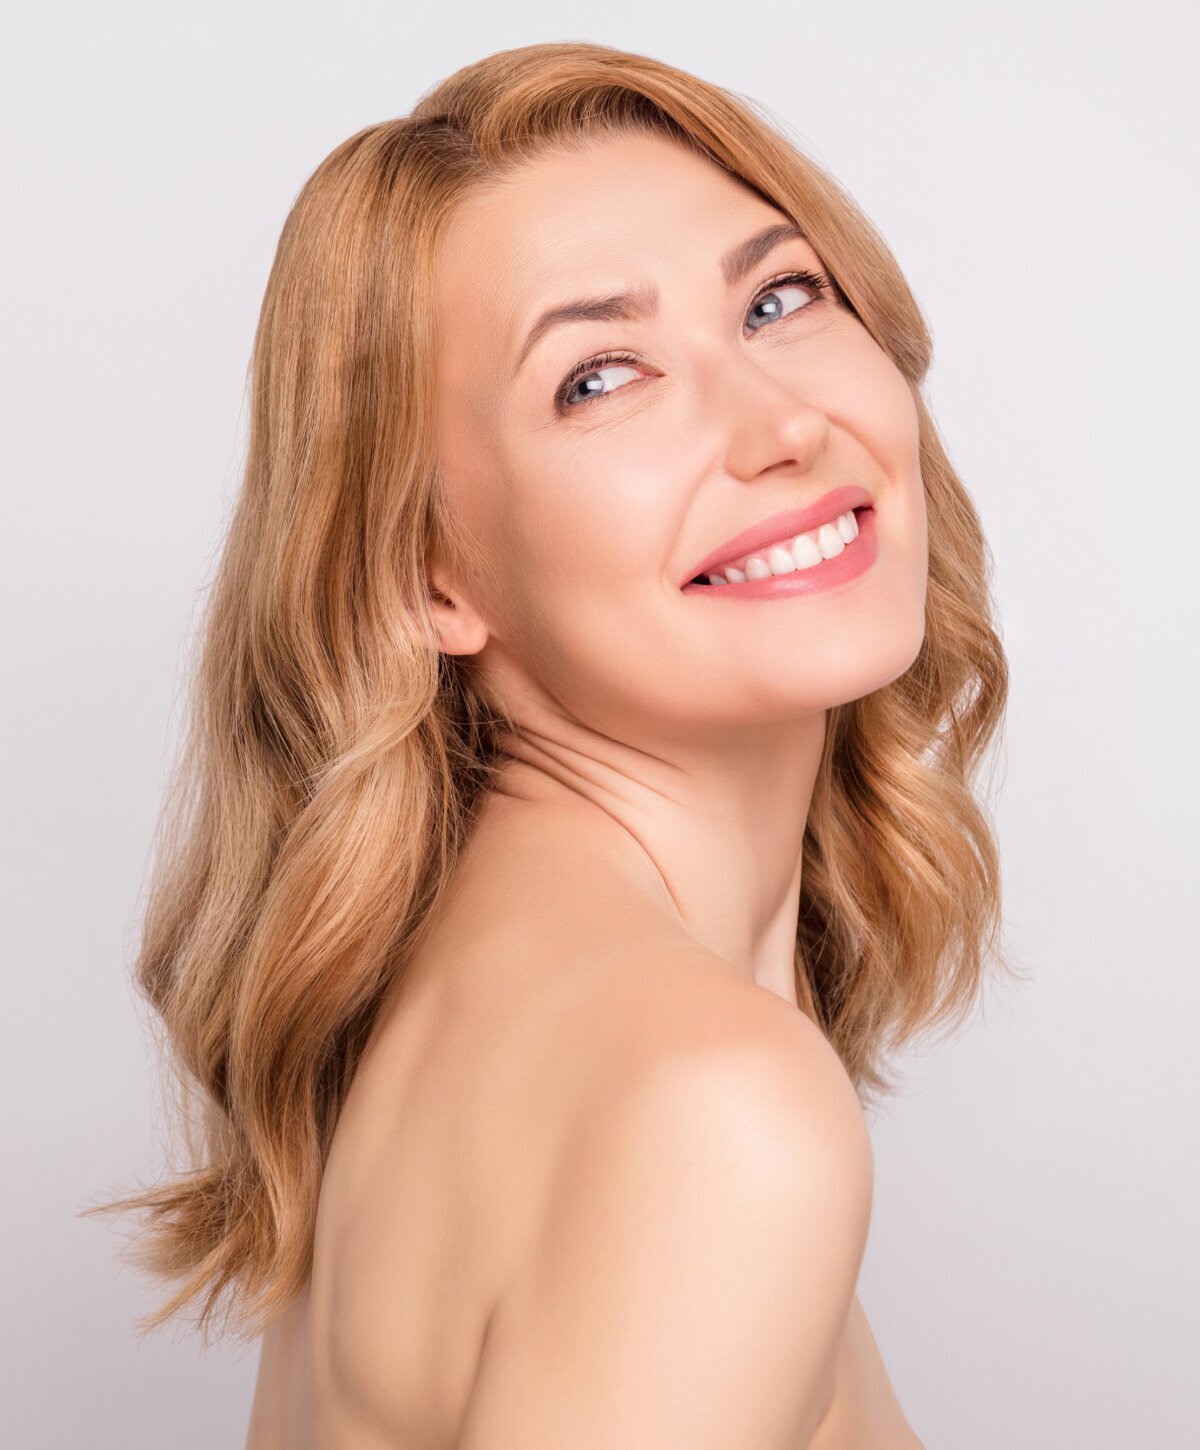 Monmouth County Laser Treatment model smiling